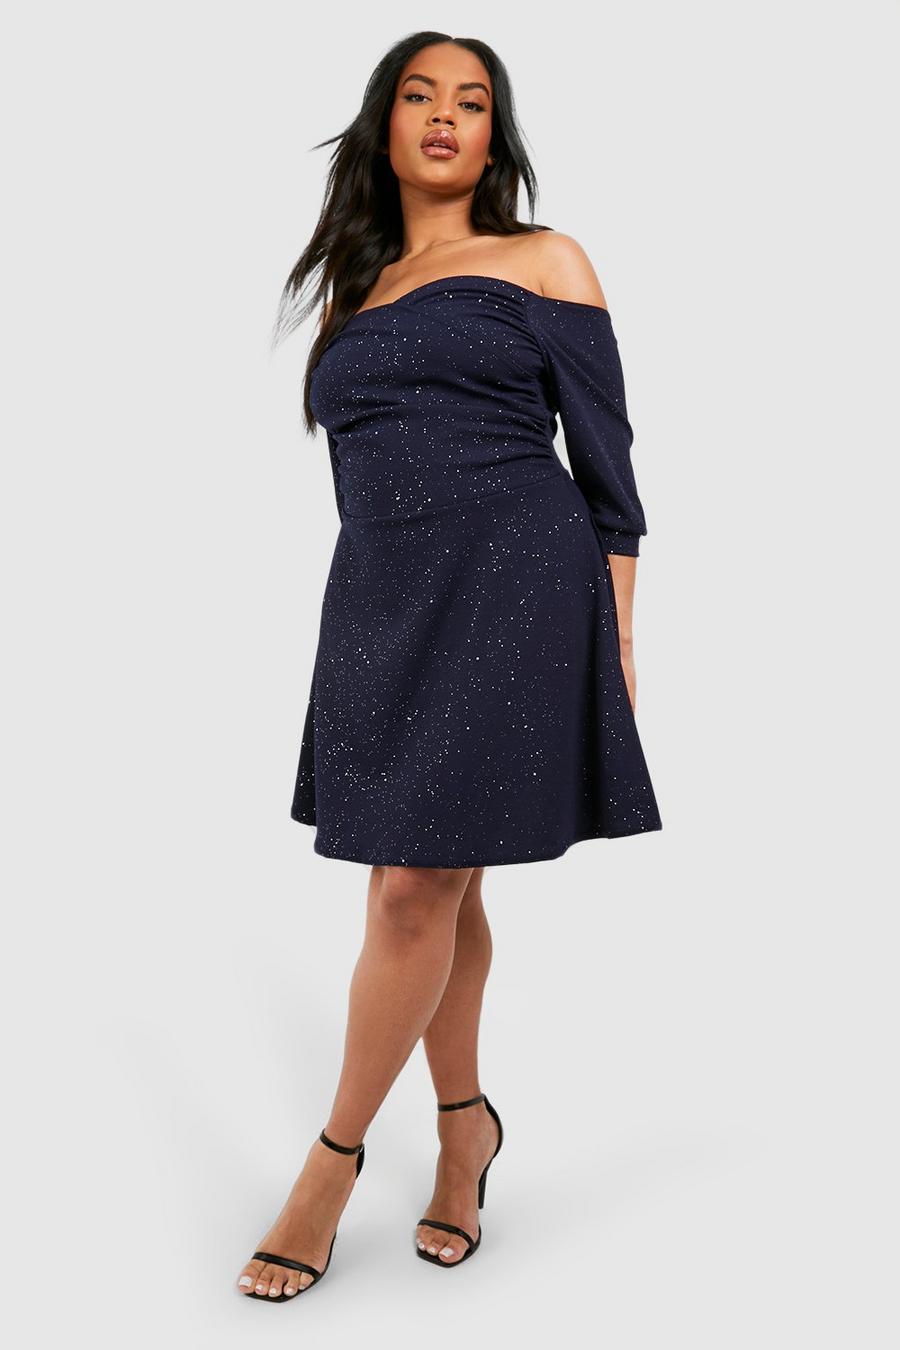 Grande taille - Robe patineuse pailletée, Navy image number 1